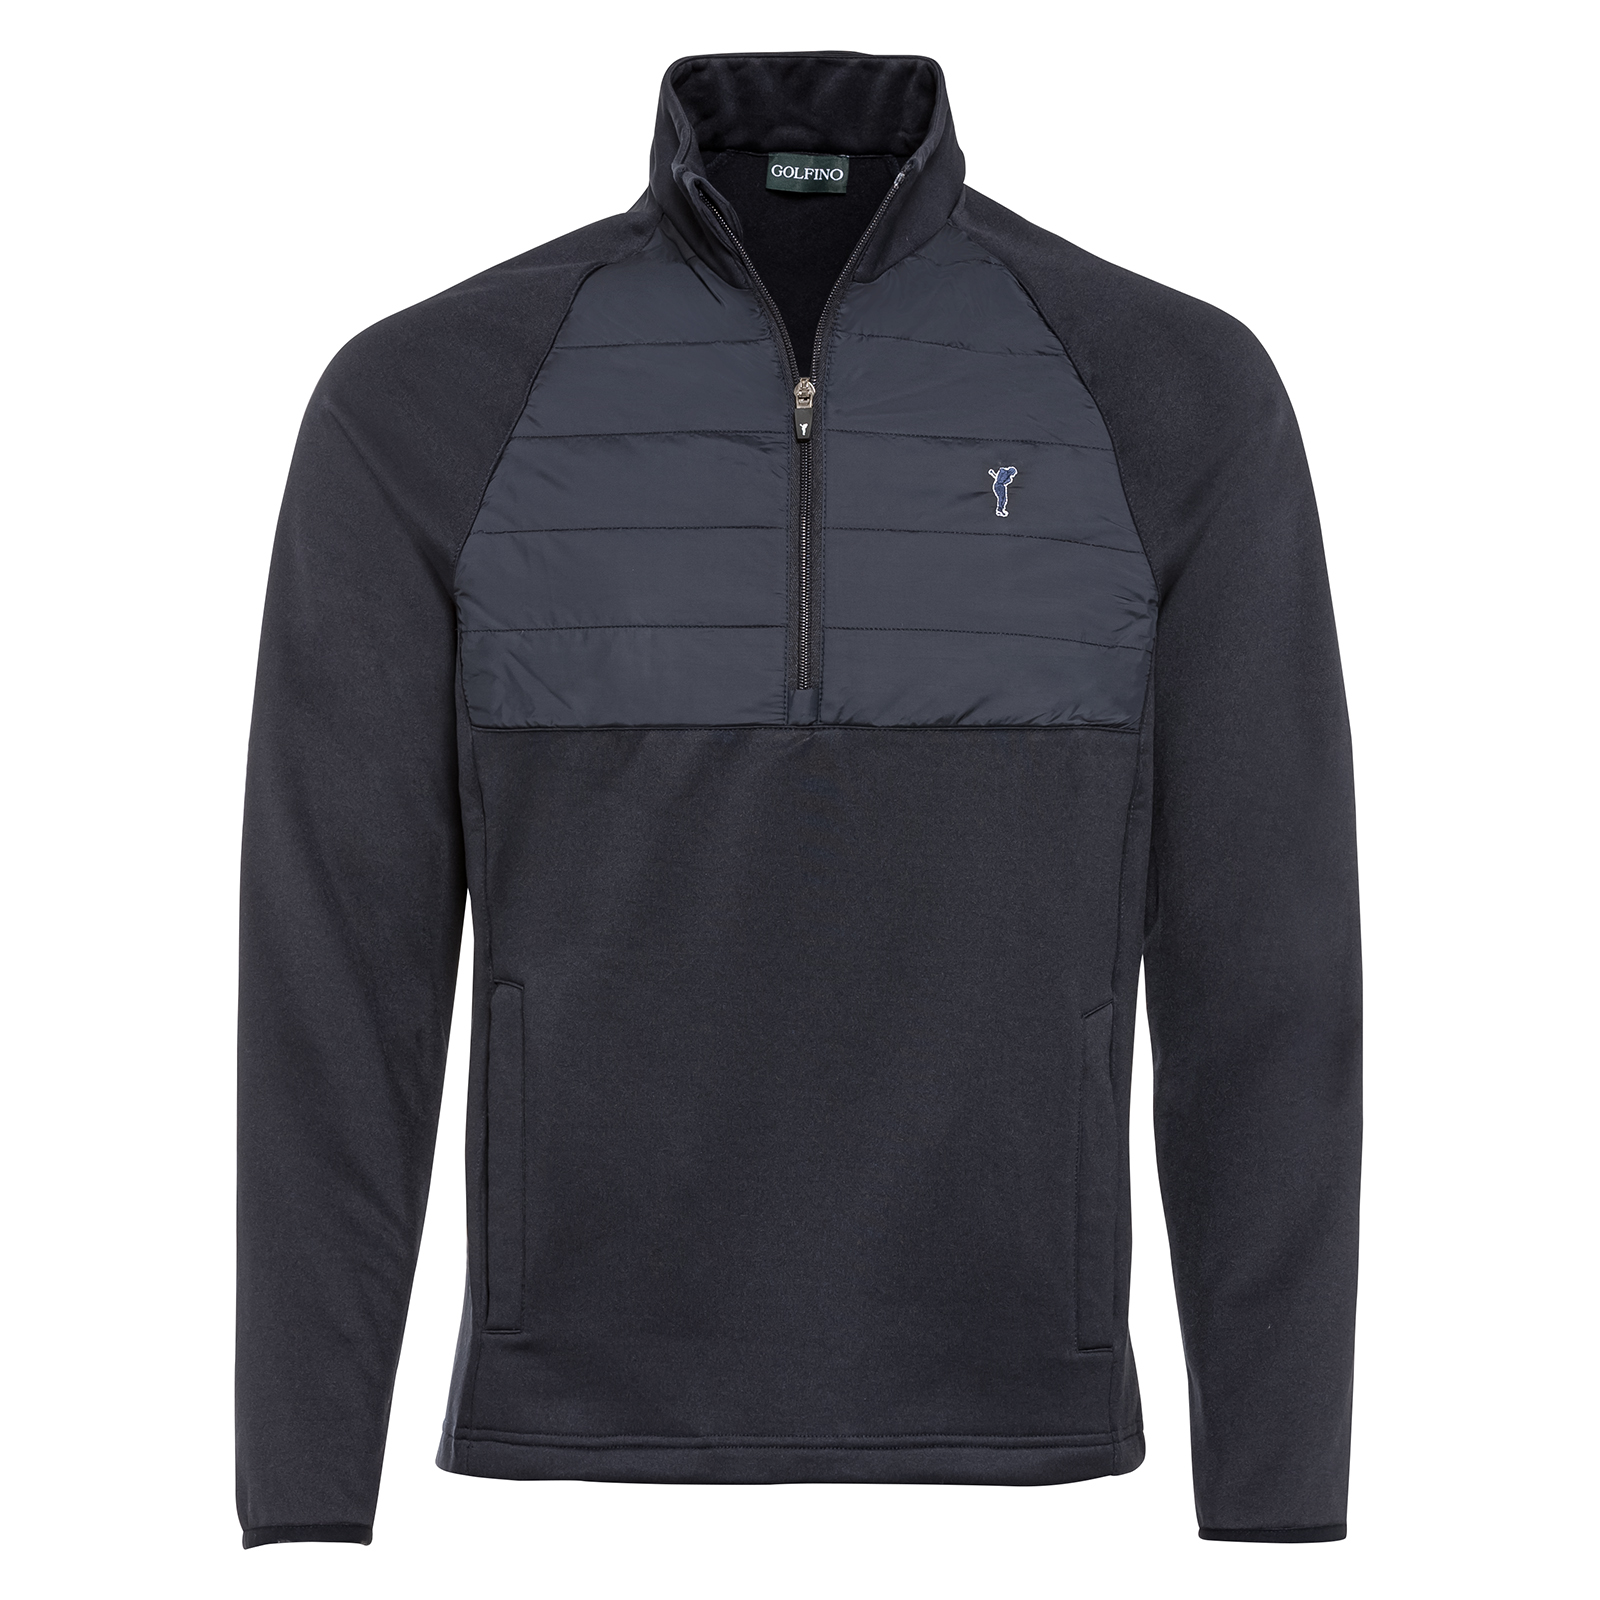 Men's lightweight half-zip golf sweater with cold weather protection 